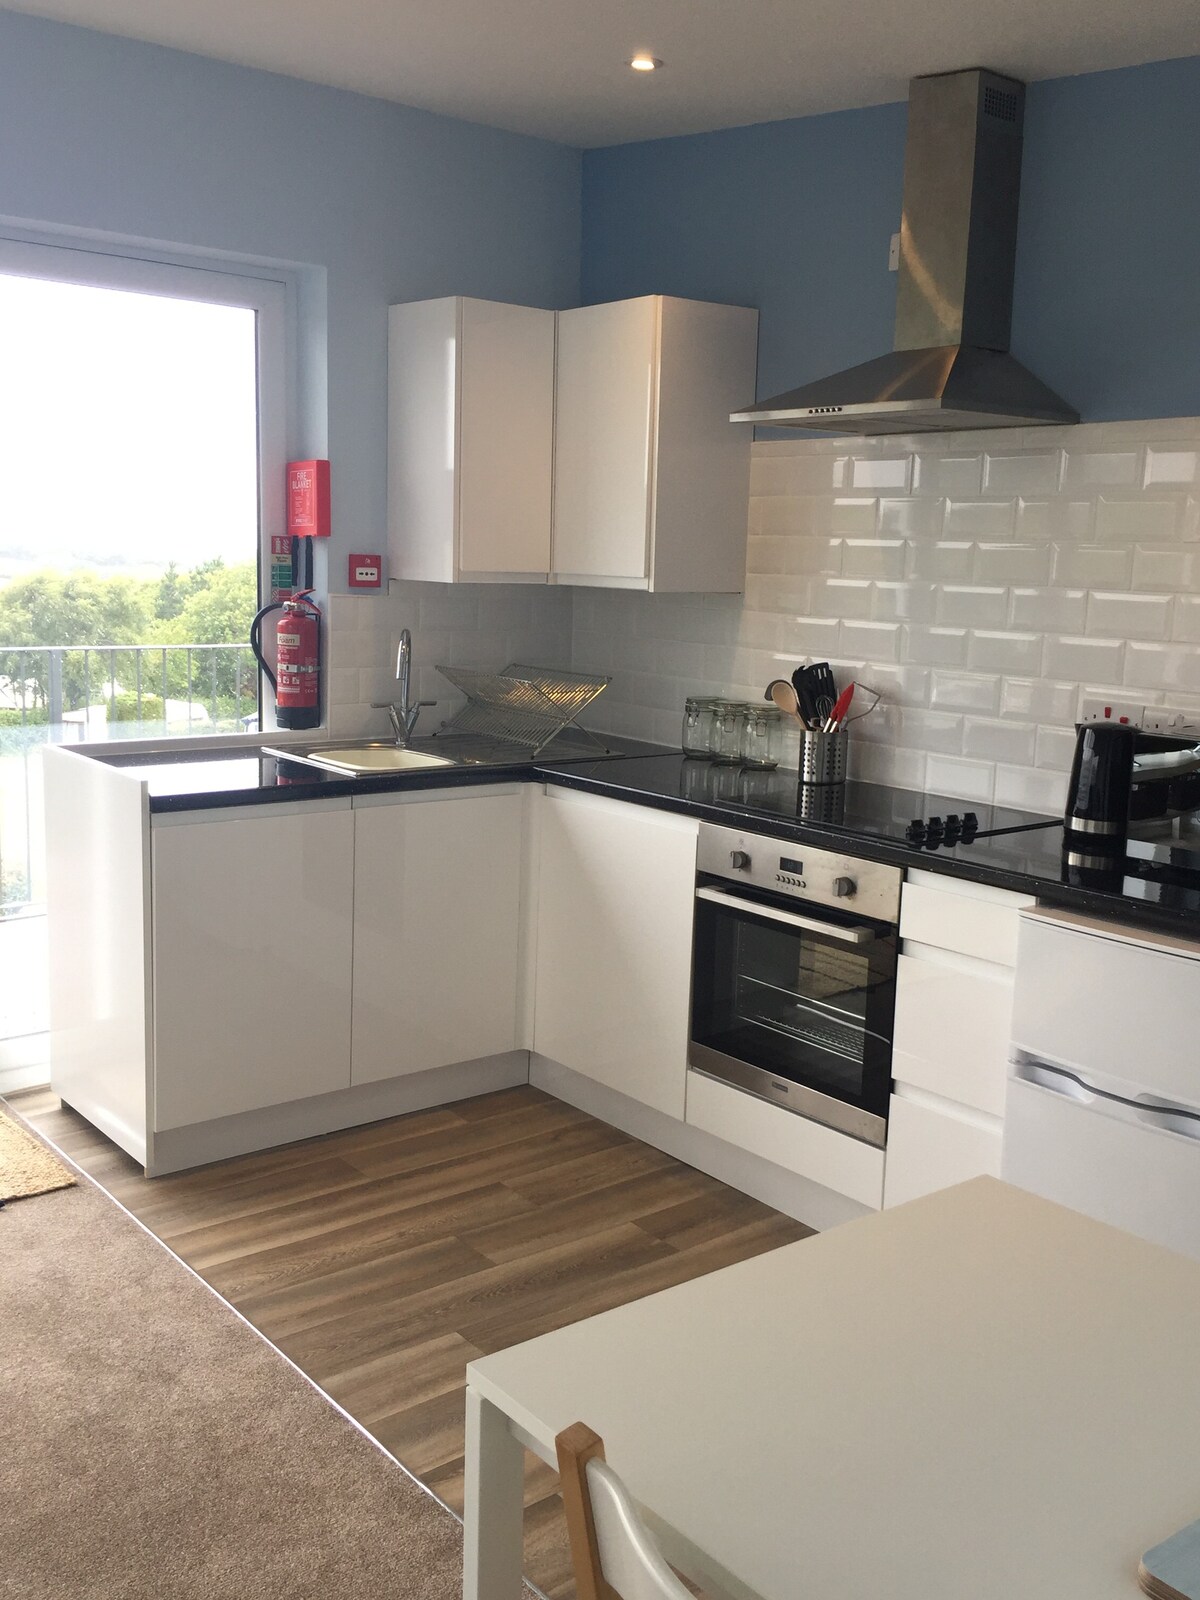 1 Bed Holiday Apartment near Bude, Cornwall